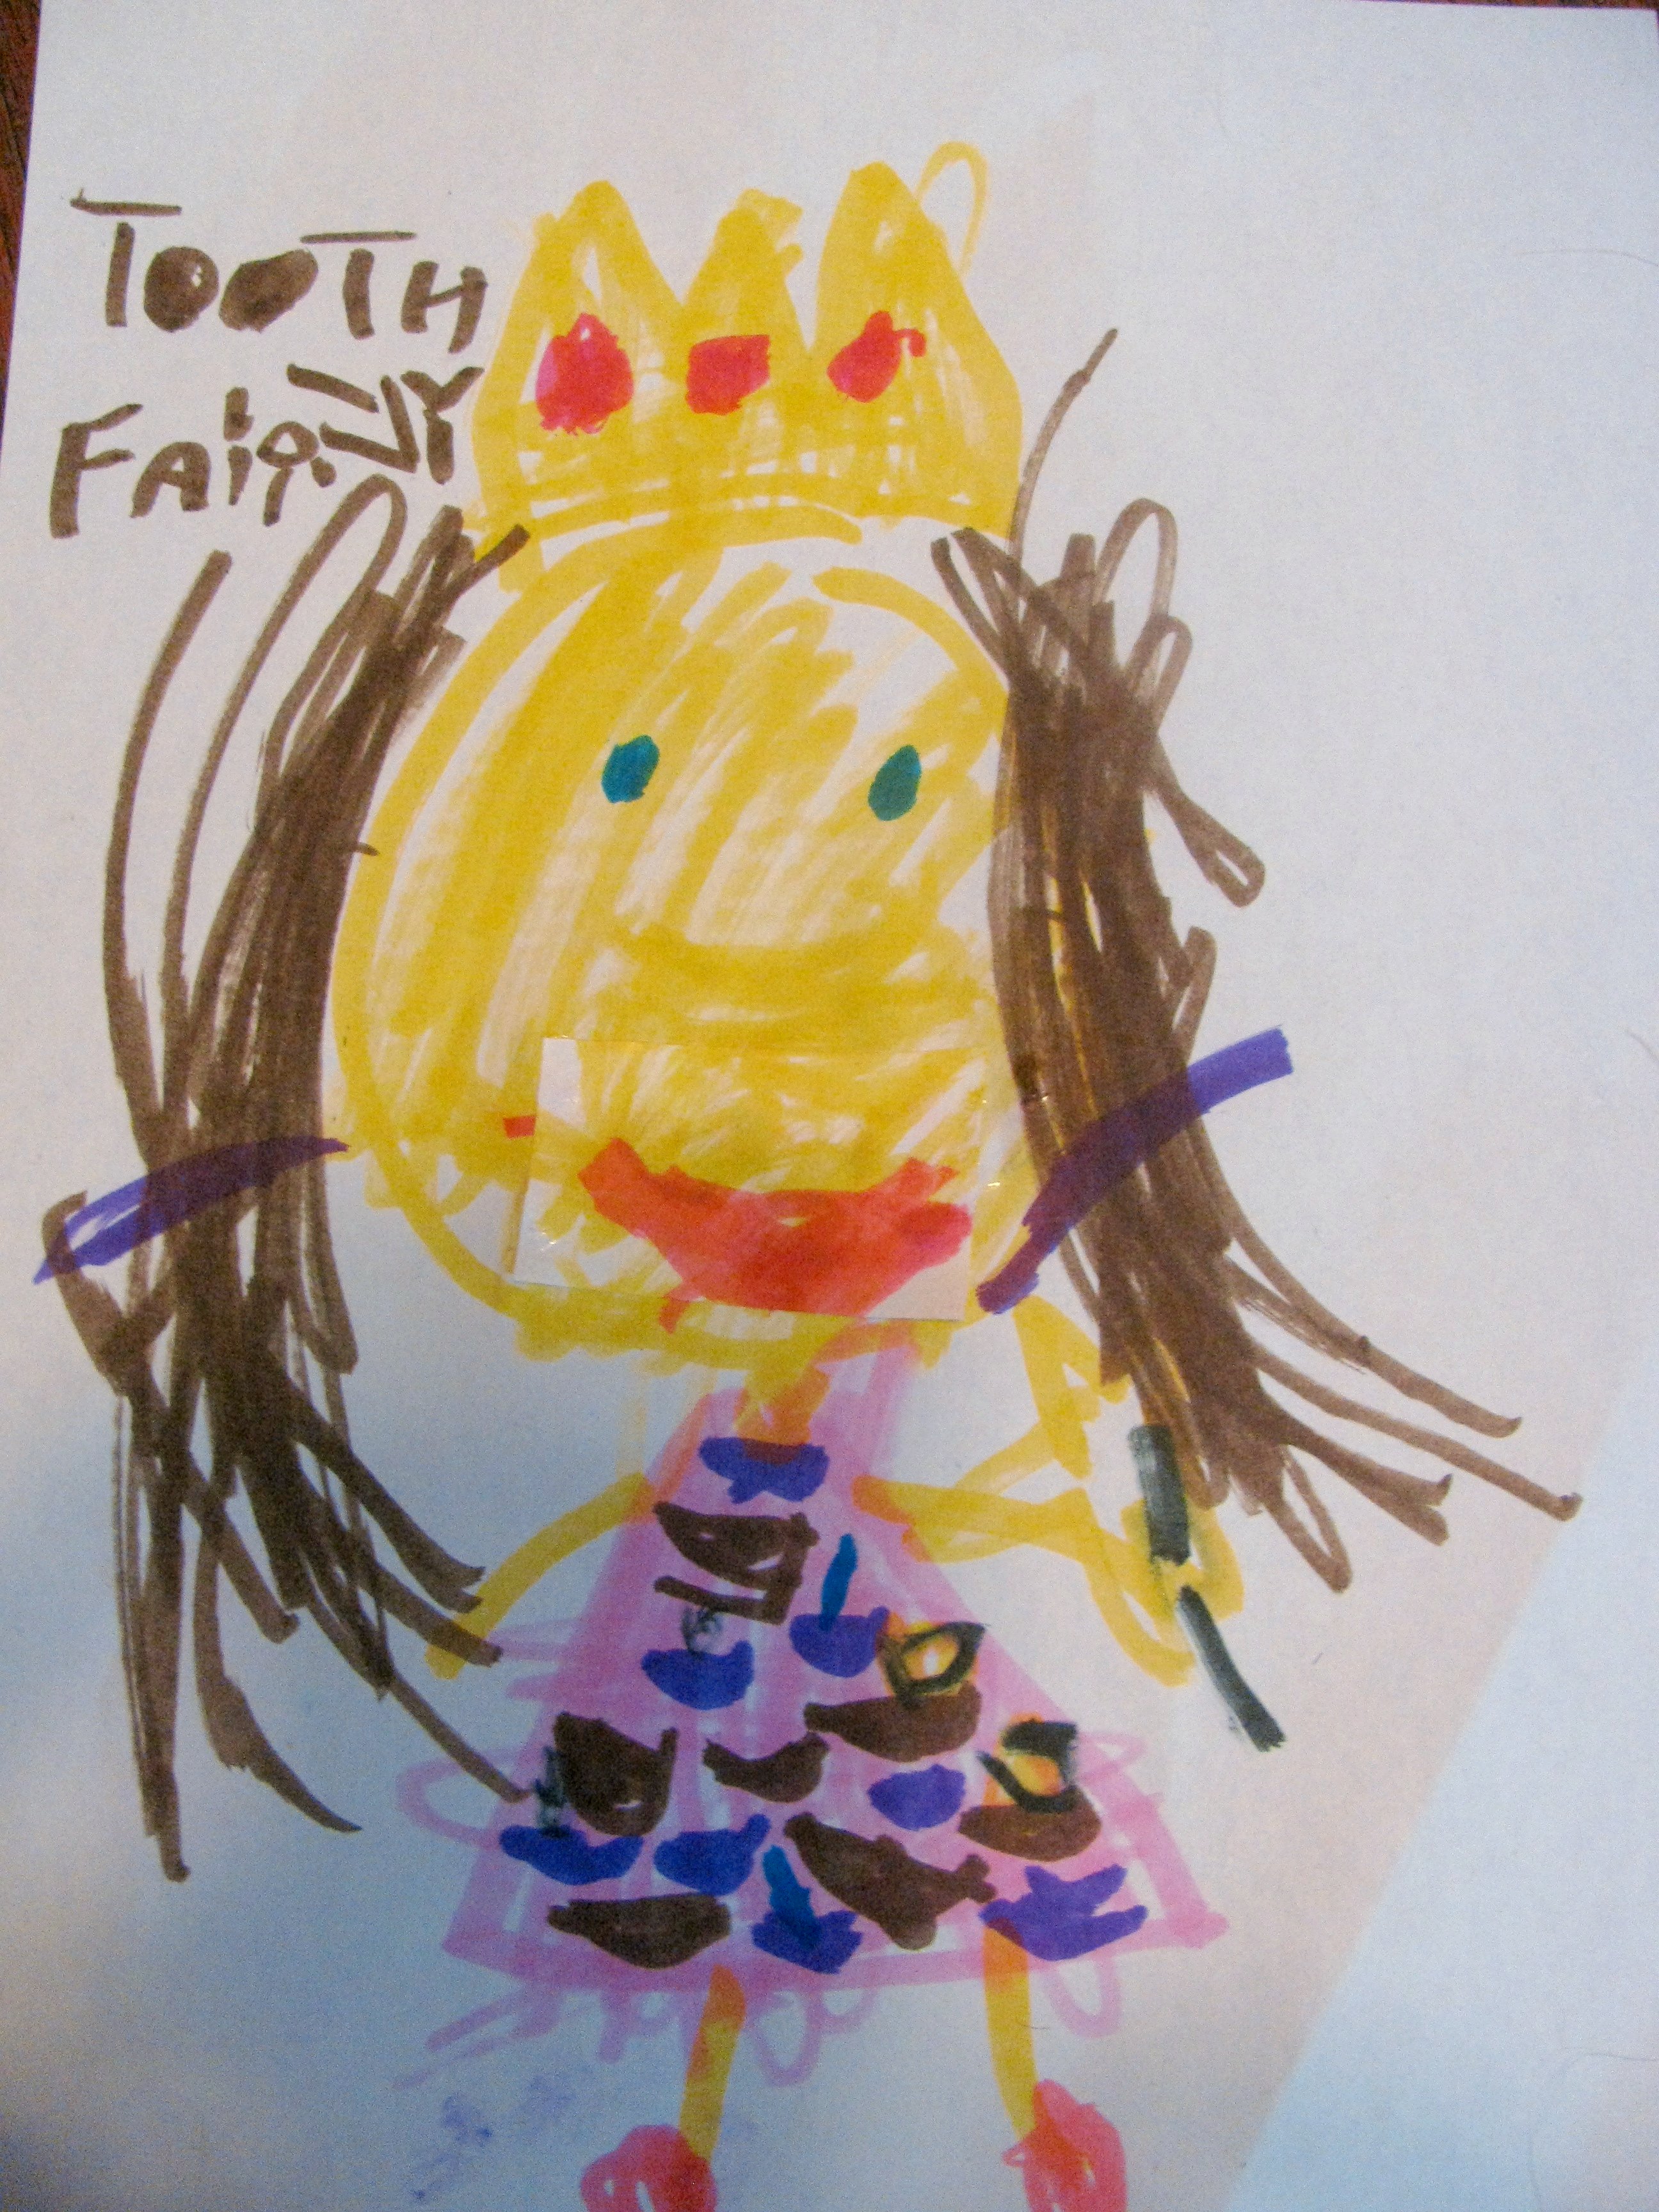 Child's Drawing of the Tooth Fairy